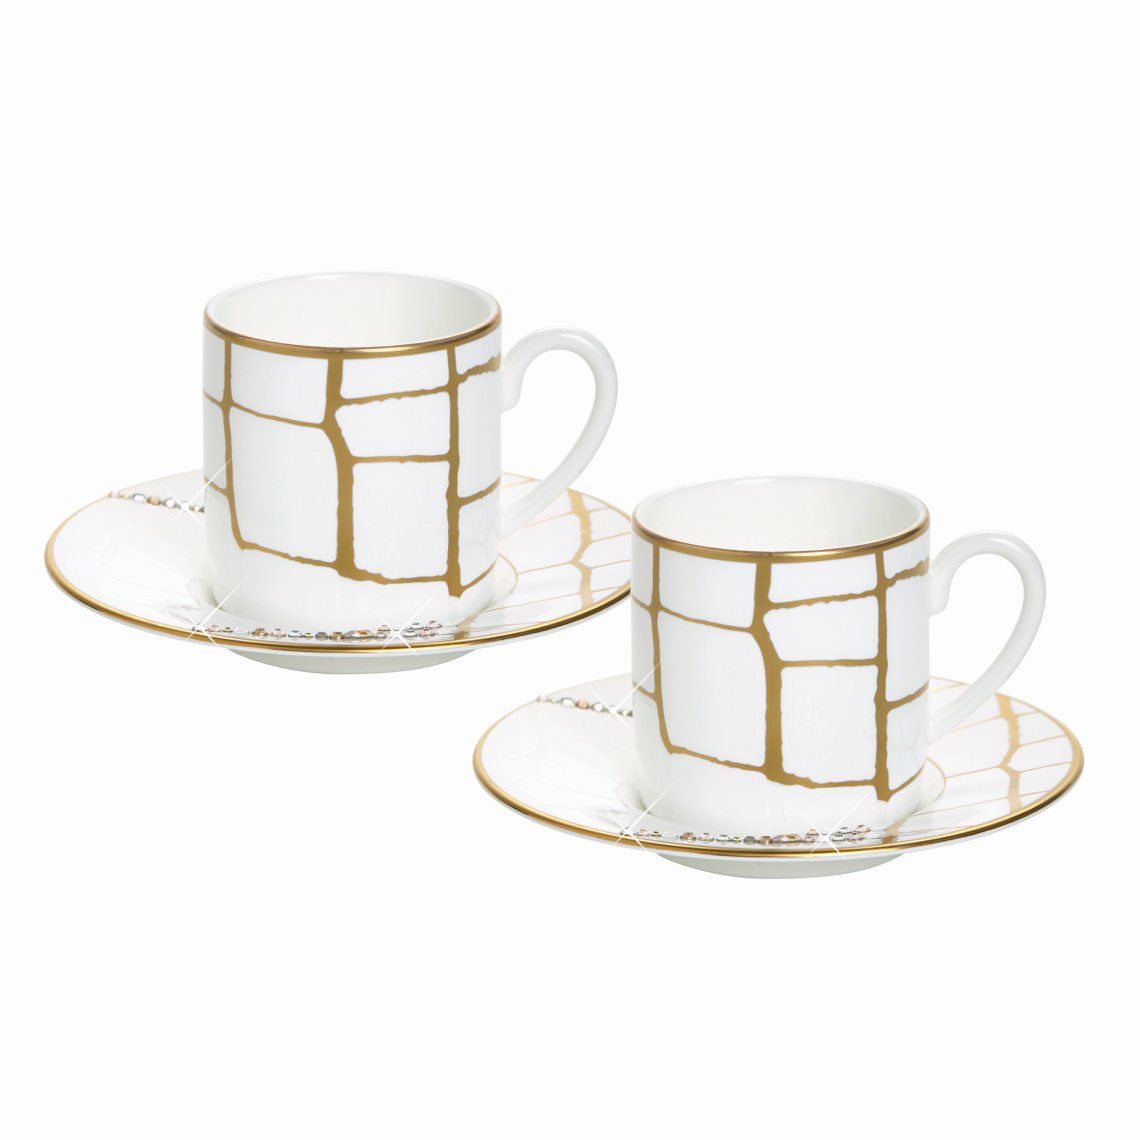 Alligator Gold Set of 2, Espresso Cups & Saucers w/ Crystals White Background Photo